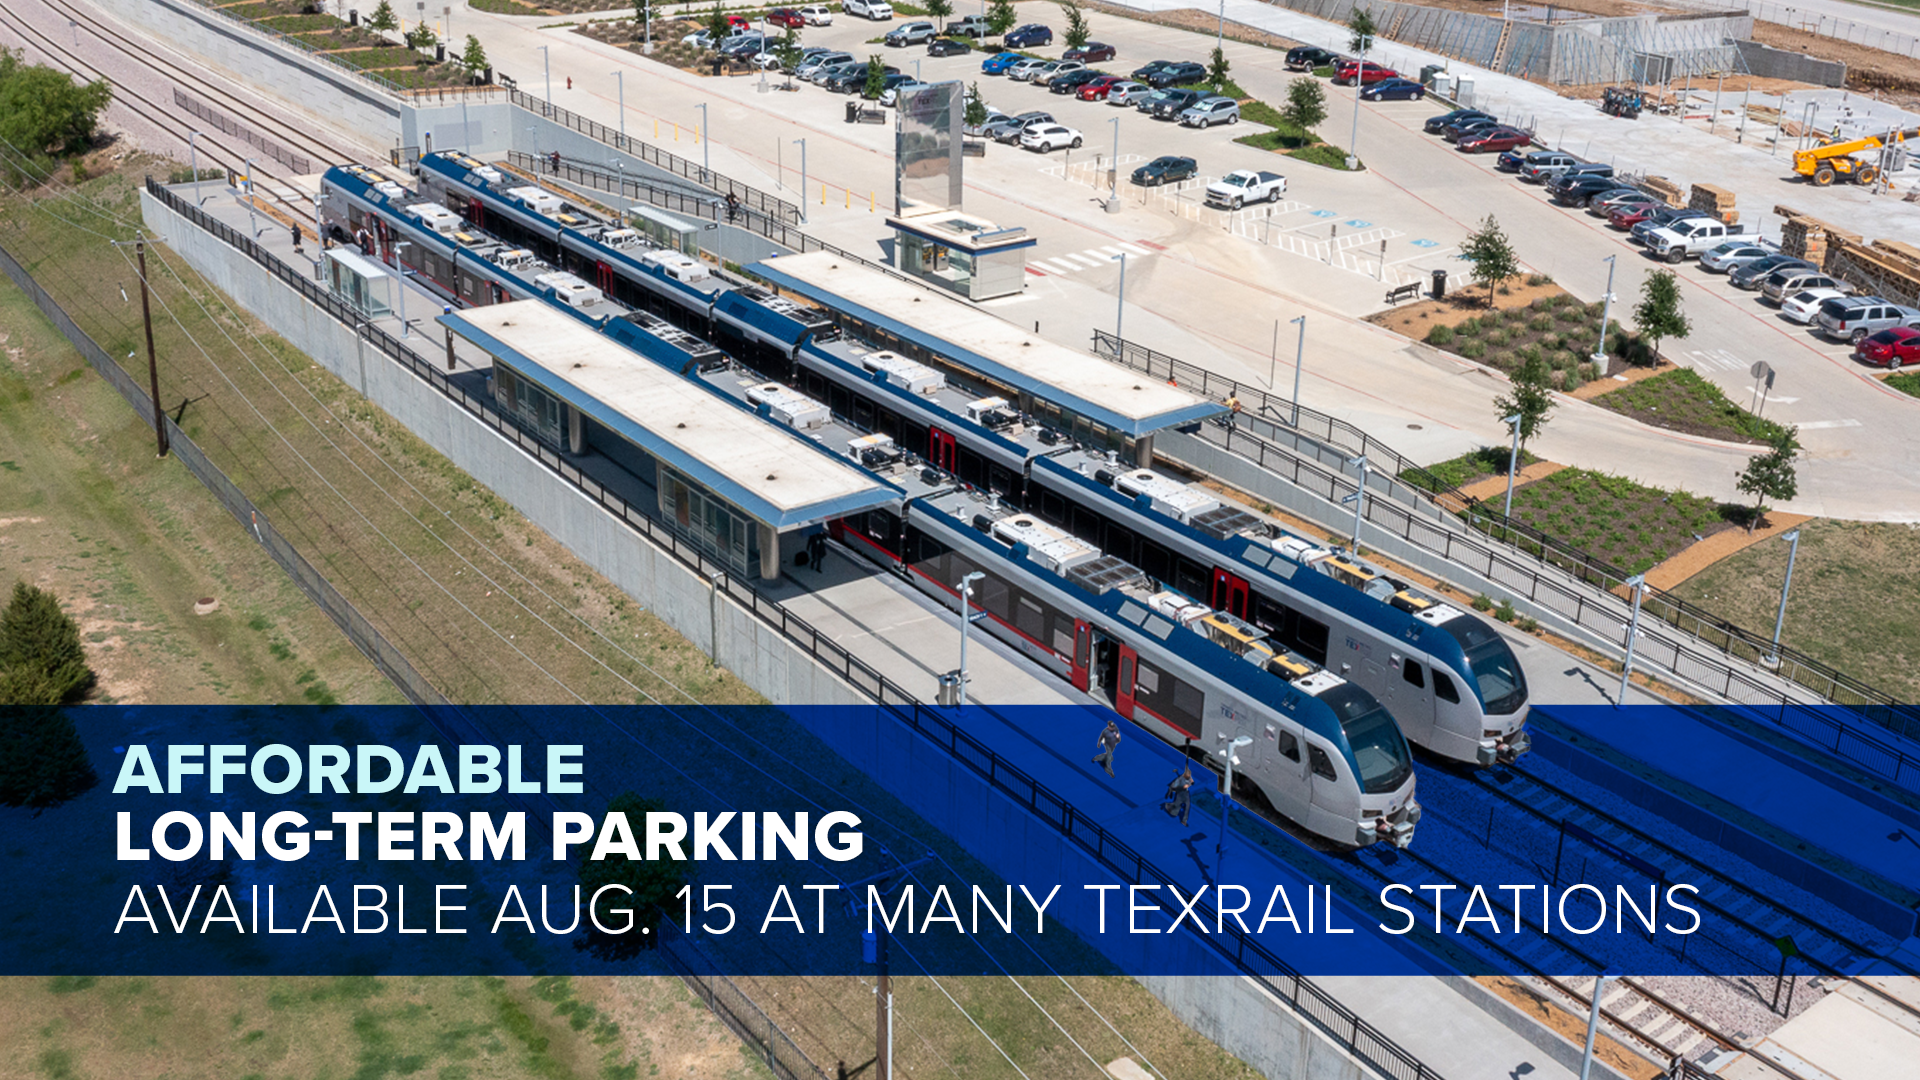 Image showing Rails with text - Affordable long-term Parking available Aug 15 at many Texrail stationss